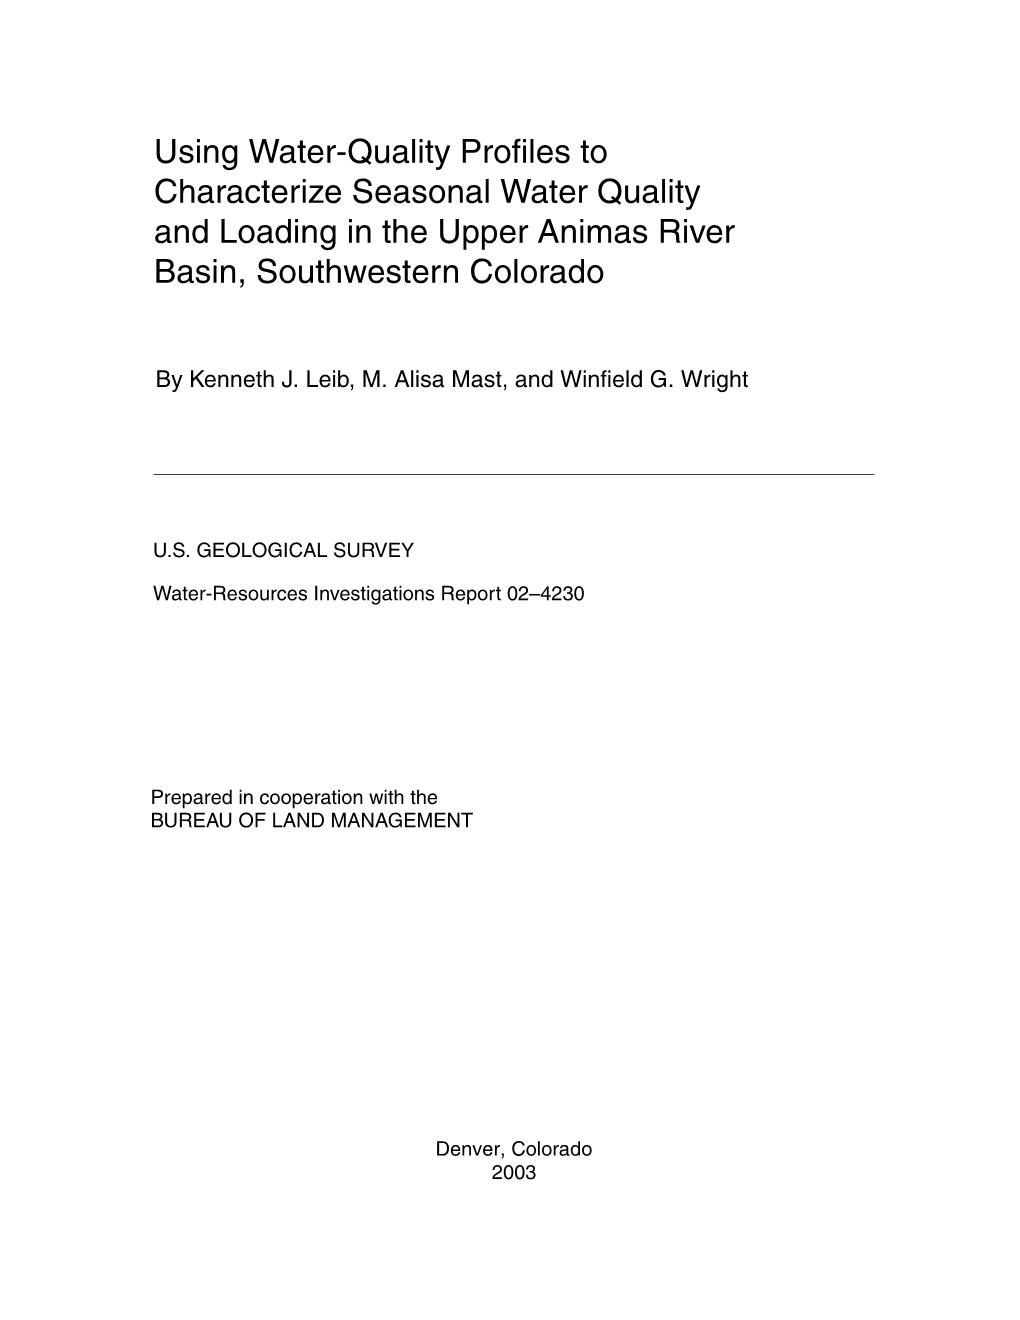 Using Water-Quality Profiles to Characterize Seasonal Water Quality and Loading in the Upper Animas River Basin, Southwestern Colorado